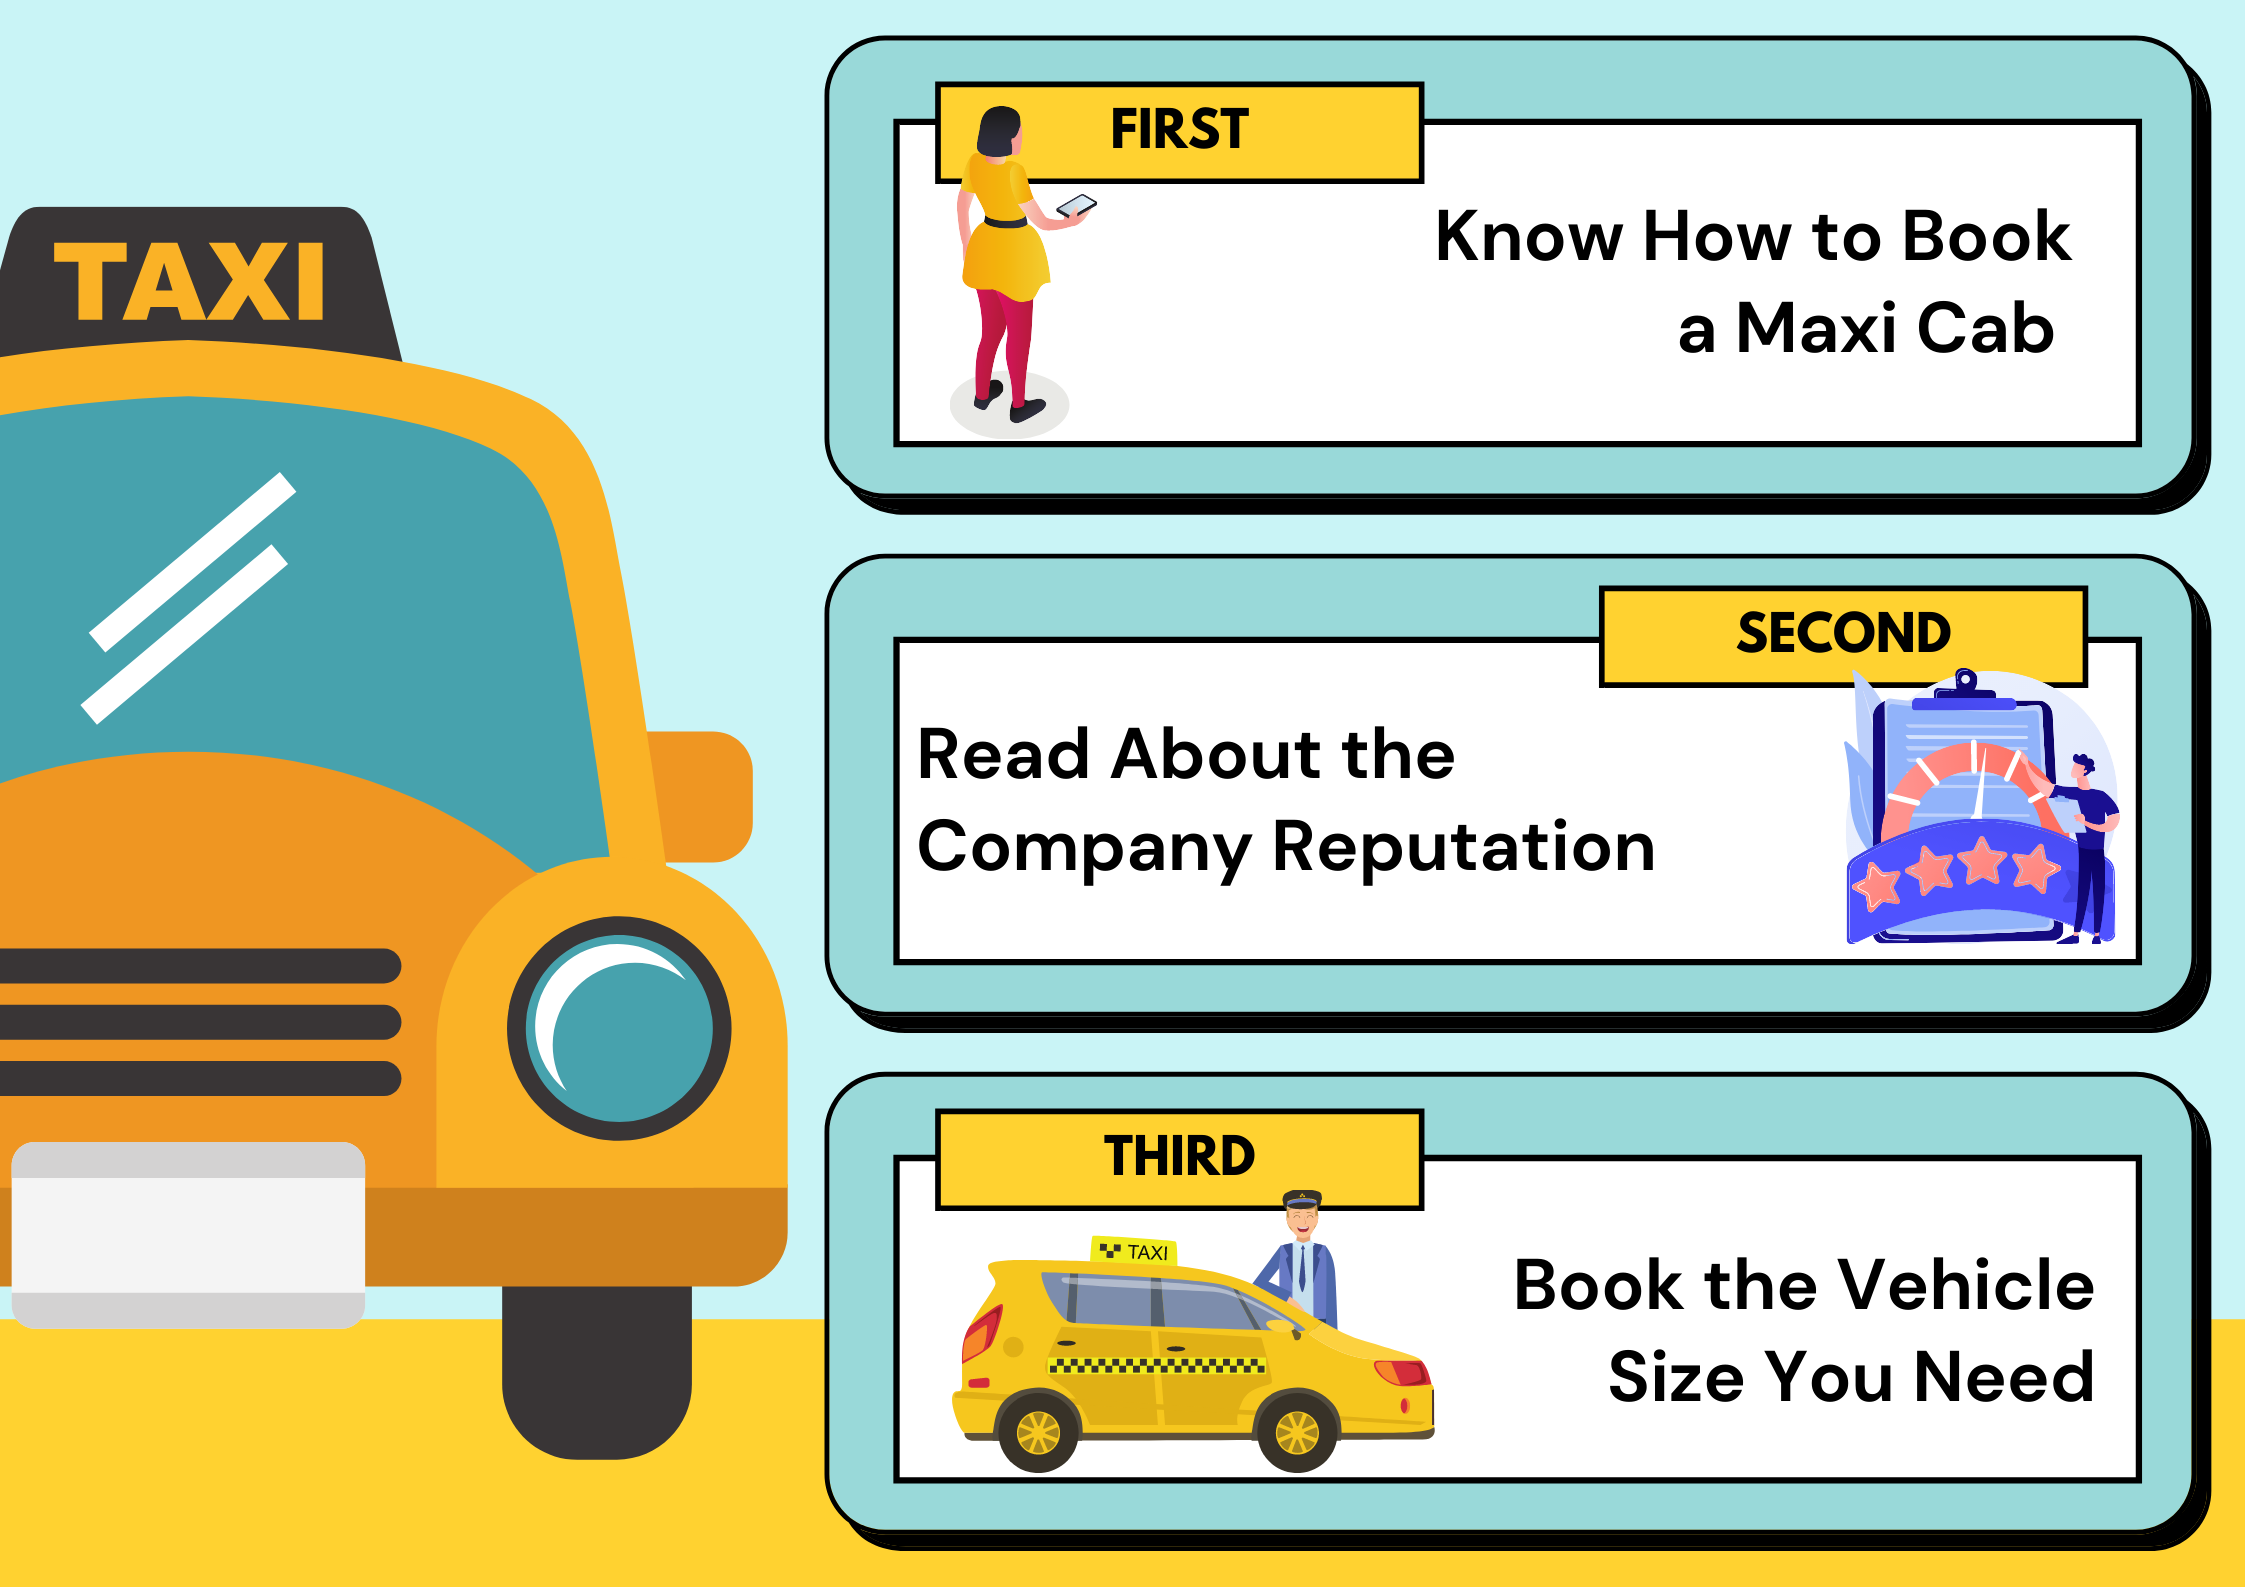 Know-How-to-Book-a-Maxi-Cab.png